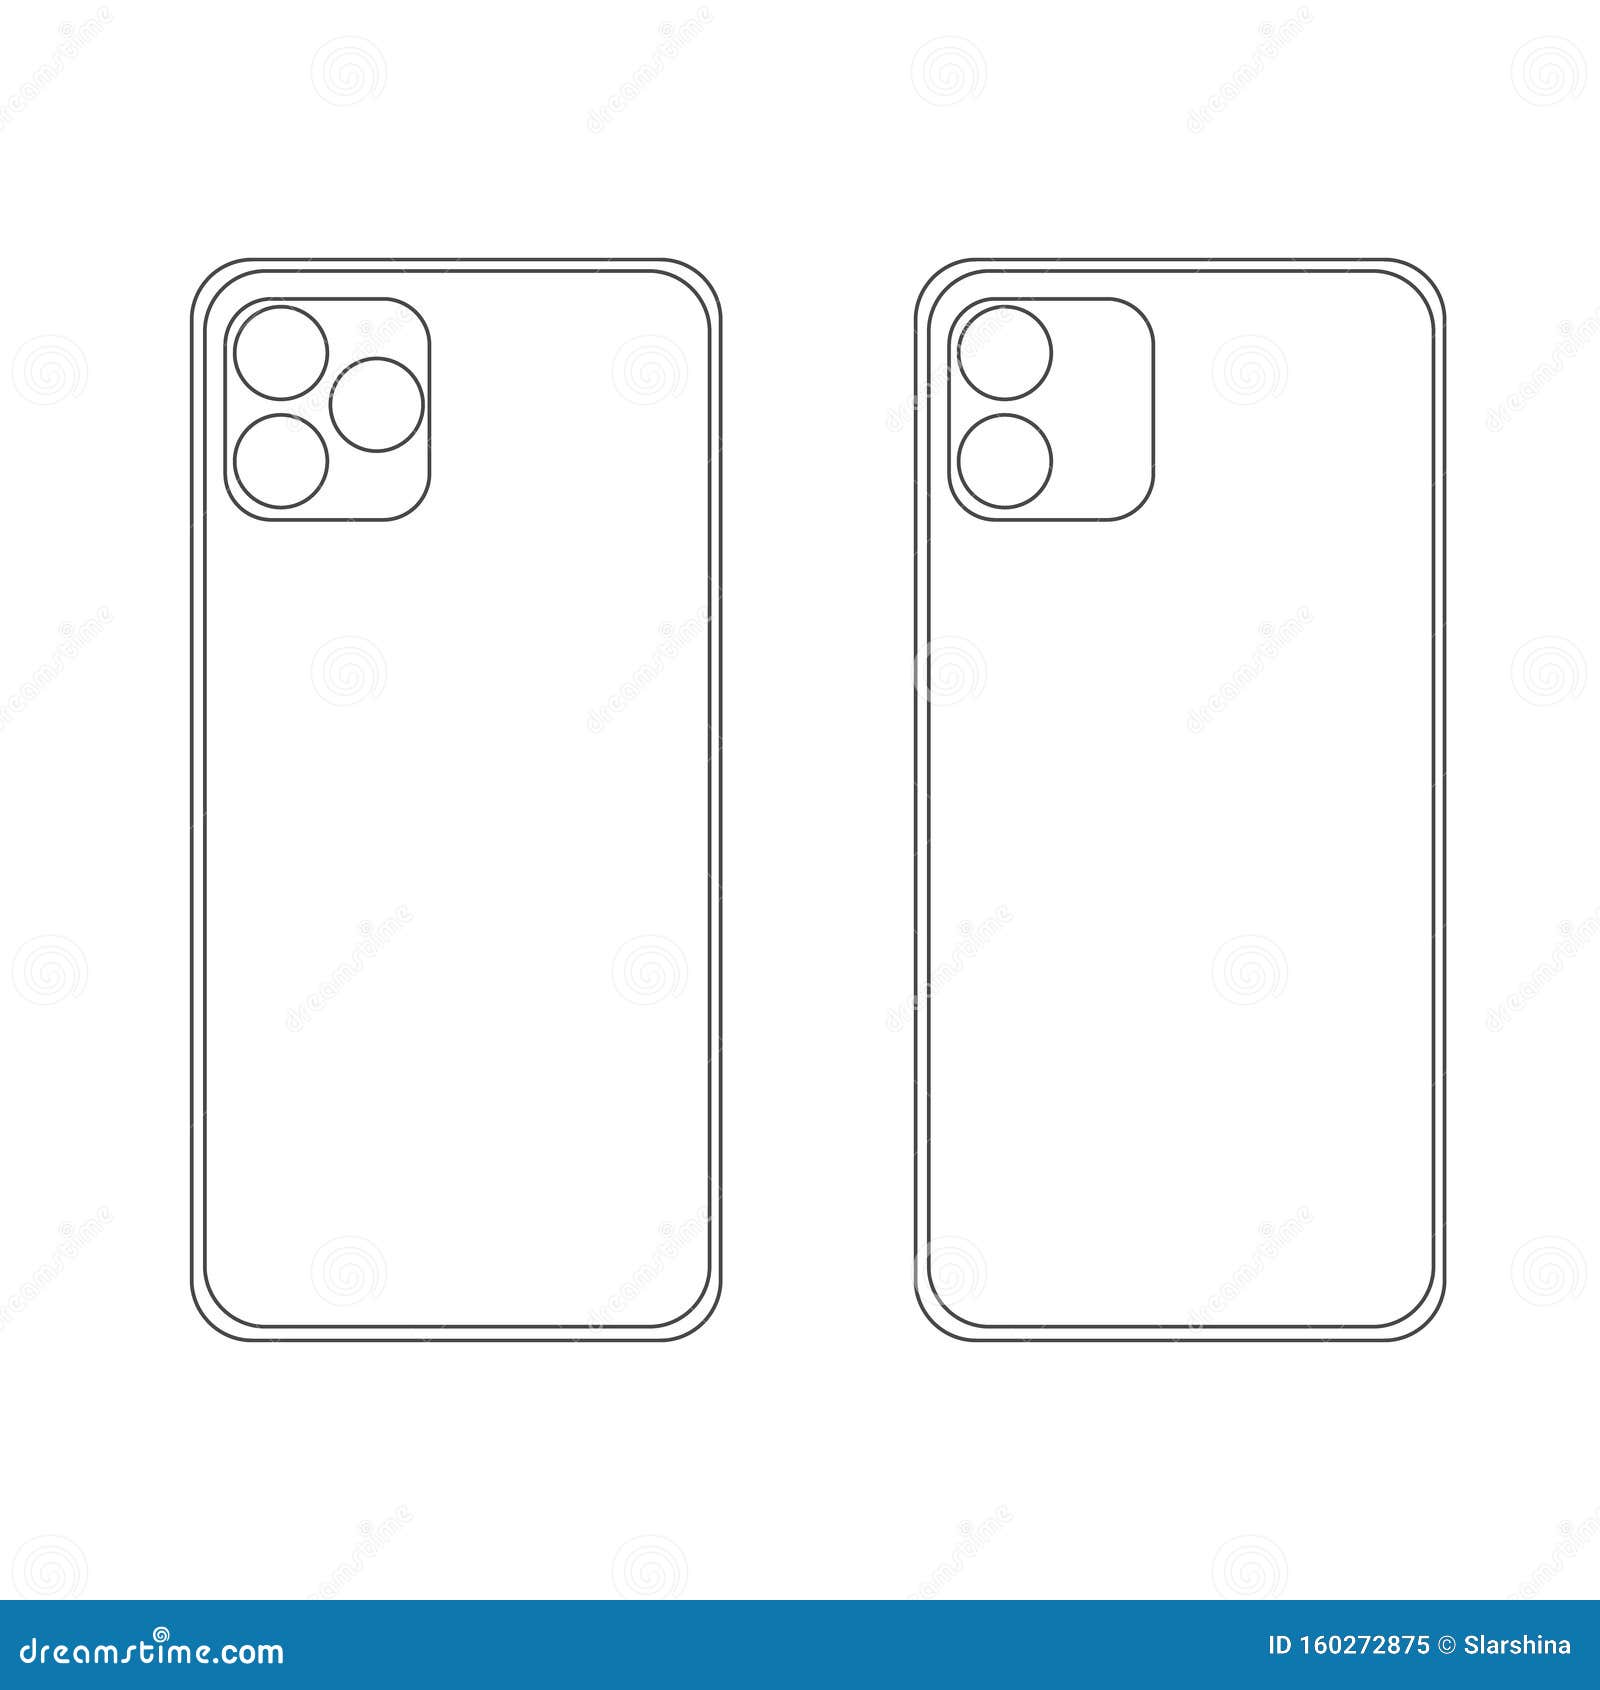 Back Side New Iphone 11 Pro Max. Vector Simple Graphic Illustration